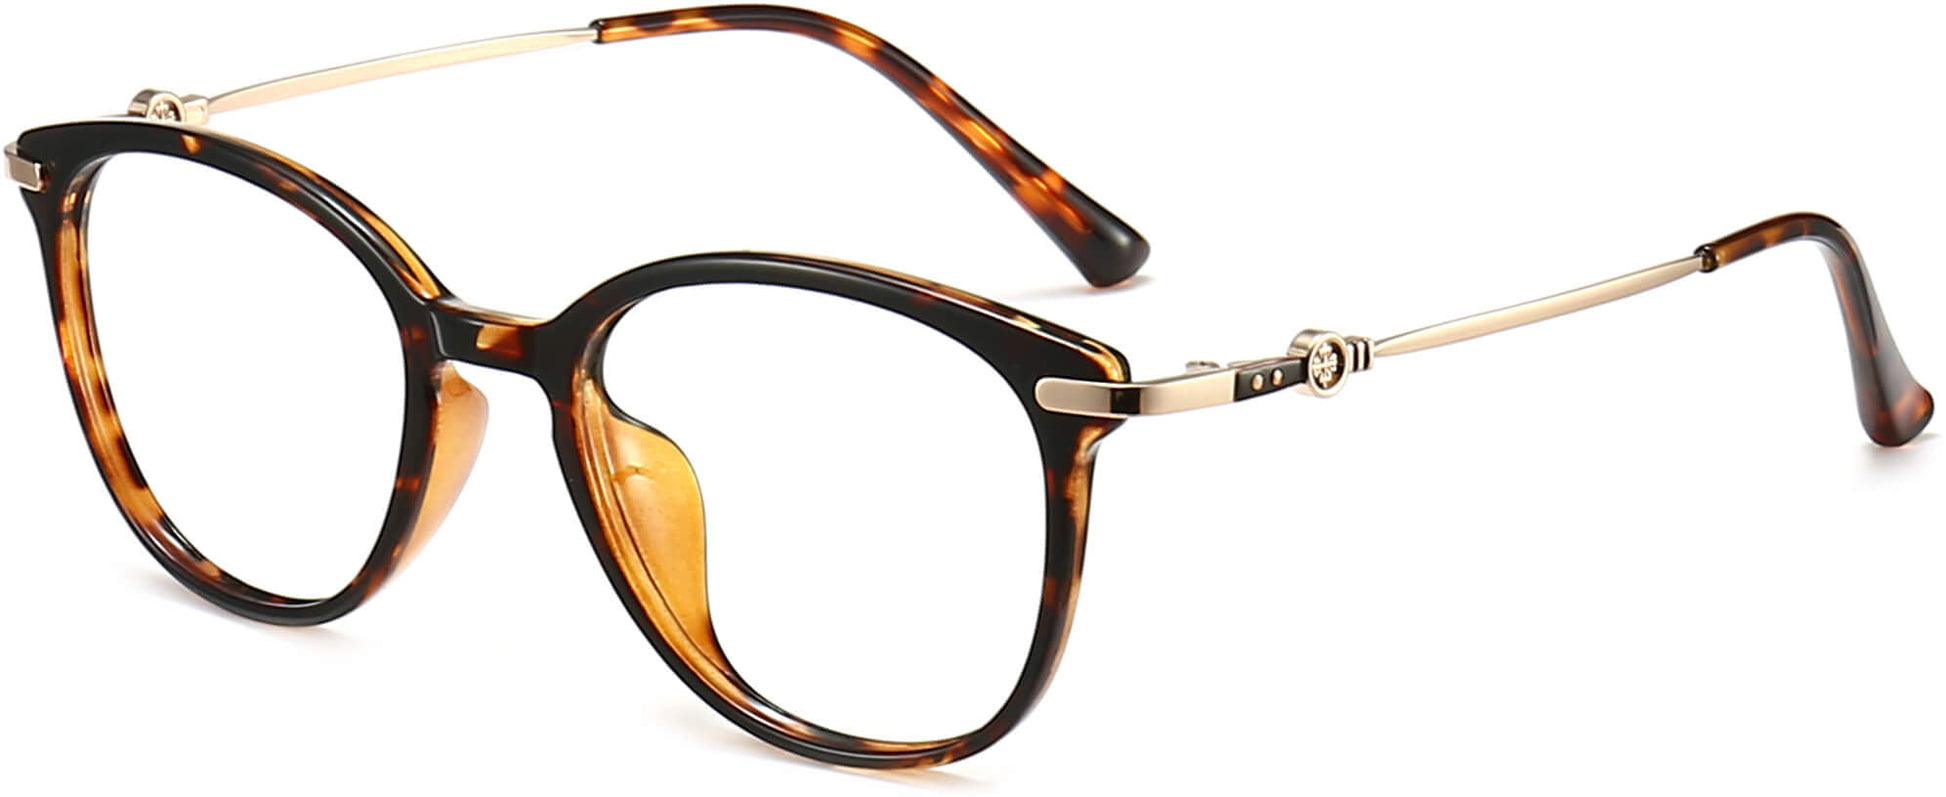 Allyson Round Tortoise Eyeglasses from ANRRI, angle view